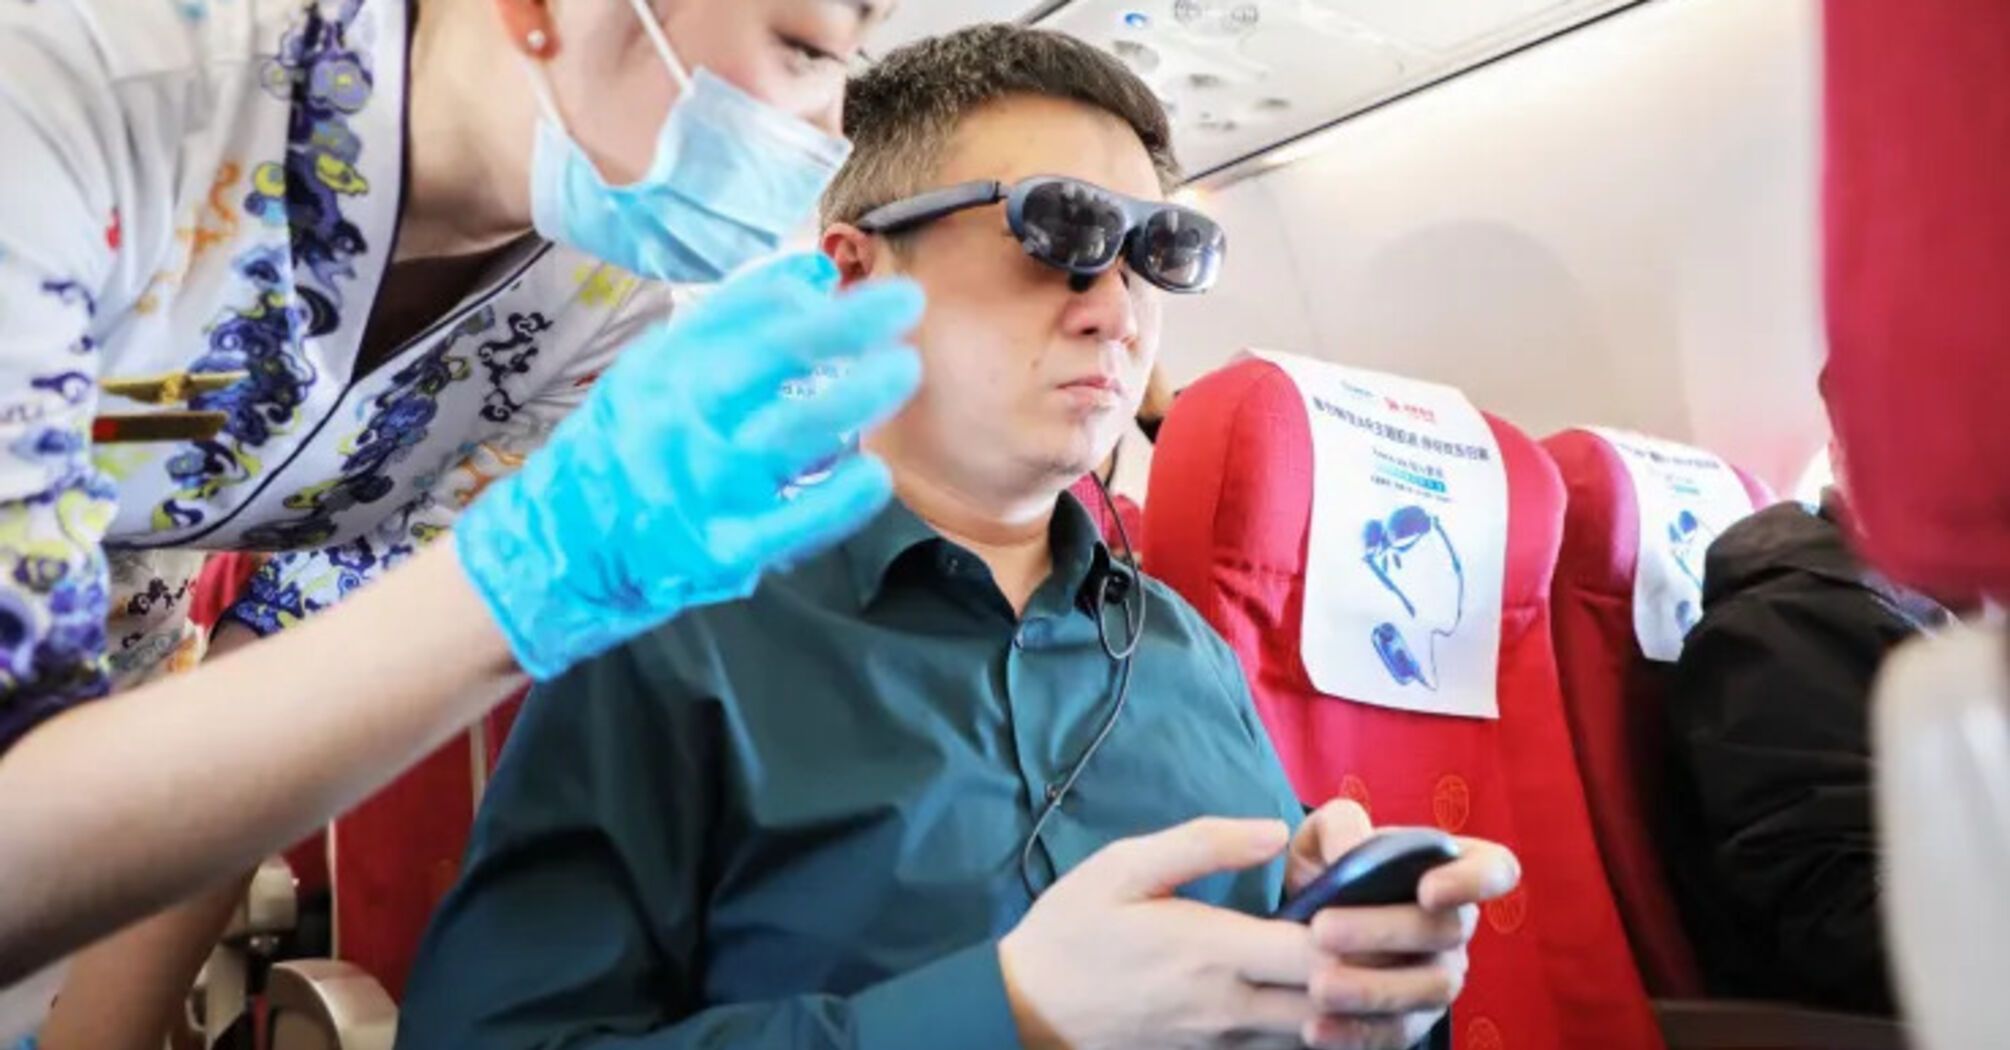 Hainan Airlinesr began providing augmented reality glasses for in-flight entertainment